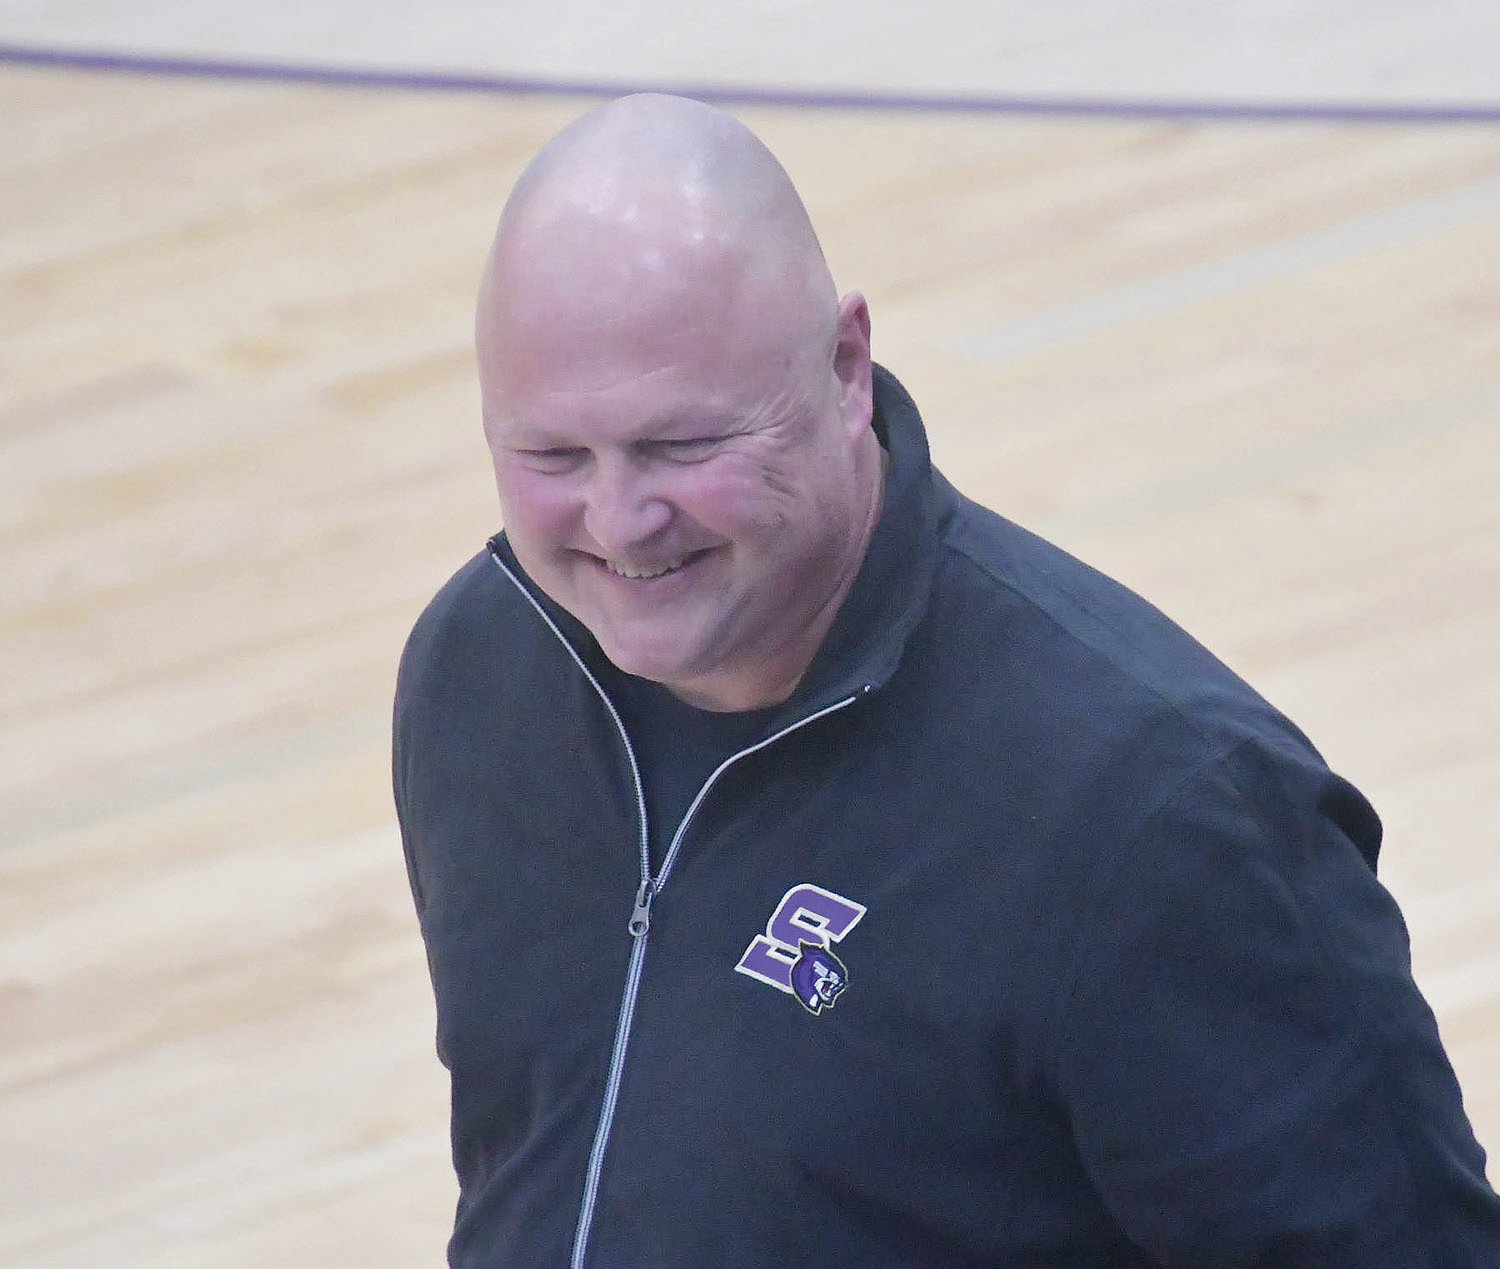 Nate King, Salisbury head softball coach, was recognized at halftime. King was recently inducted into the Missouri Fastpitch Coaches Association Hall of Fame.